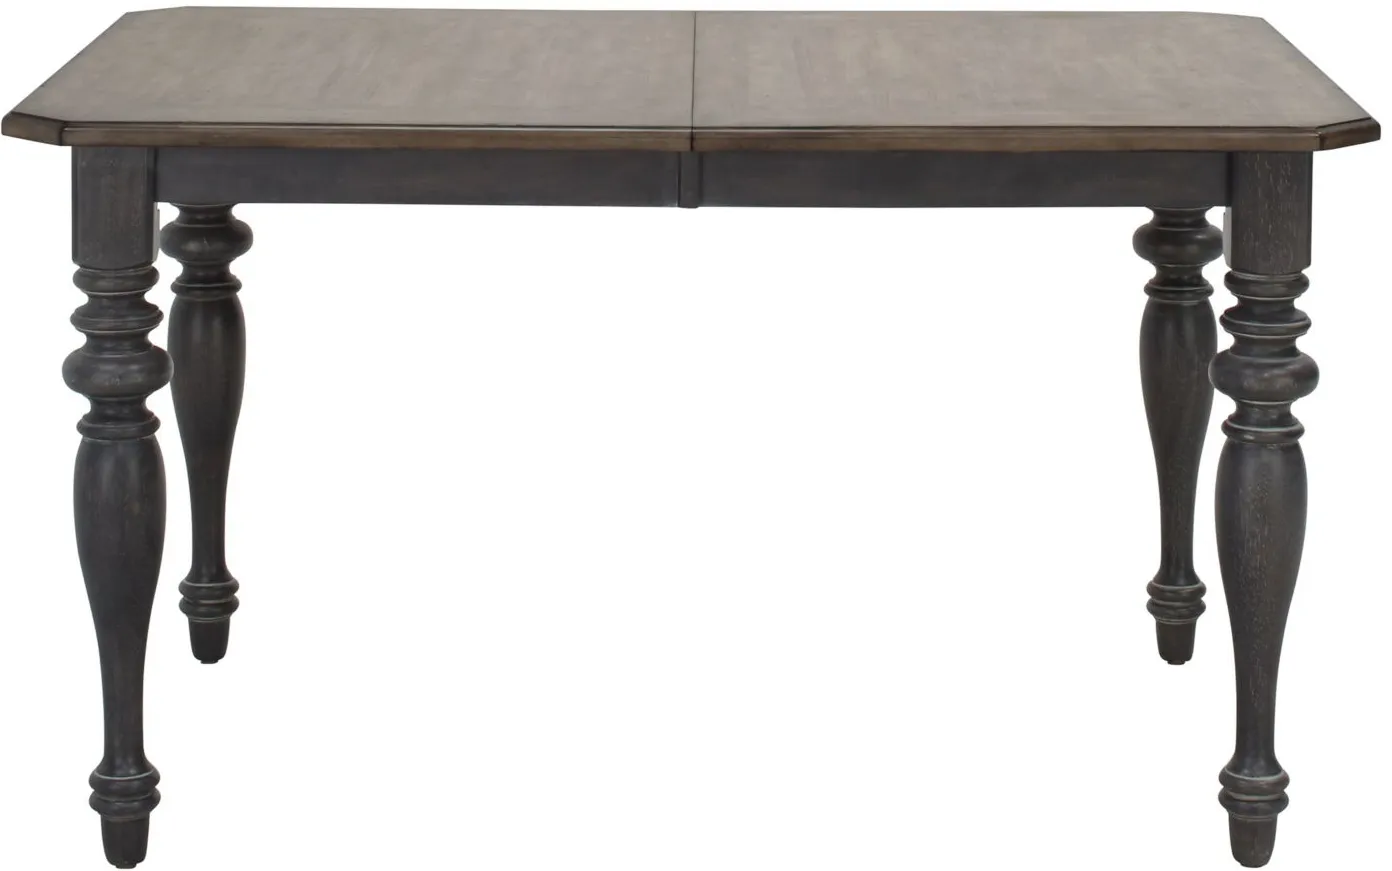 Charleston Dining Table w/ Leaf in Slate w/ Weathered Pine Finish by Liberty Furniture